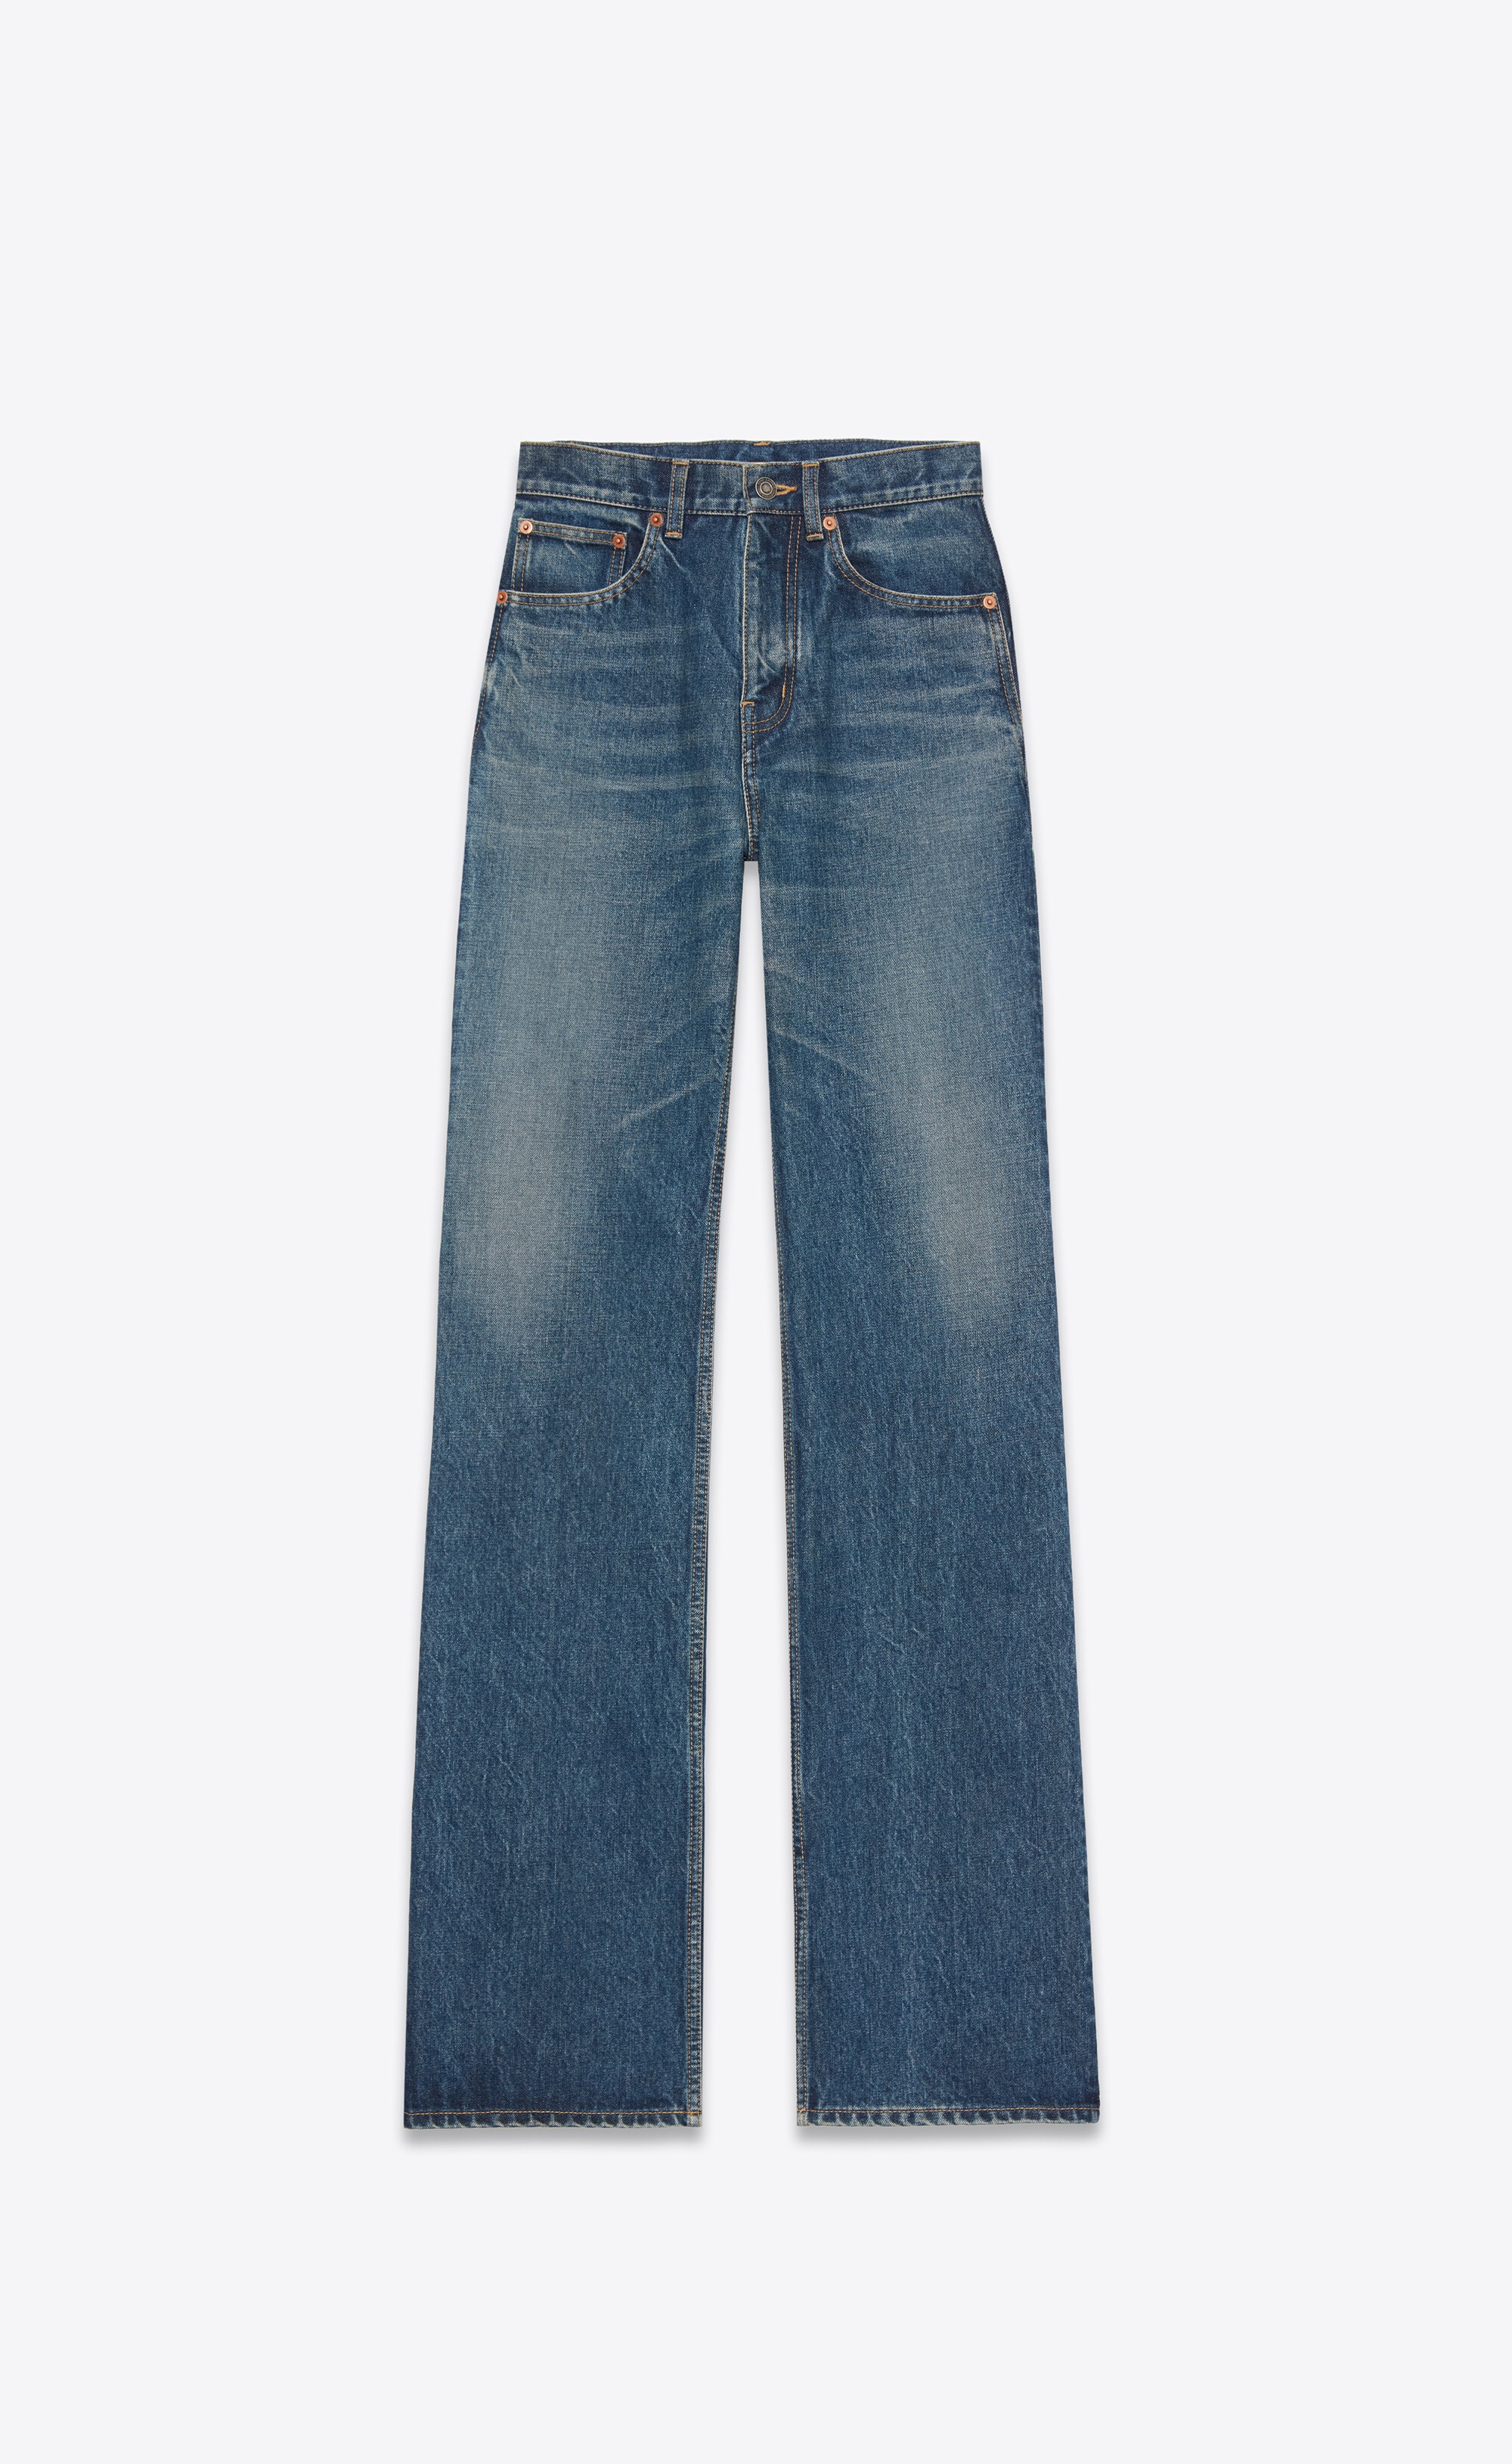 clyde jeans in august blue denim - 1